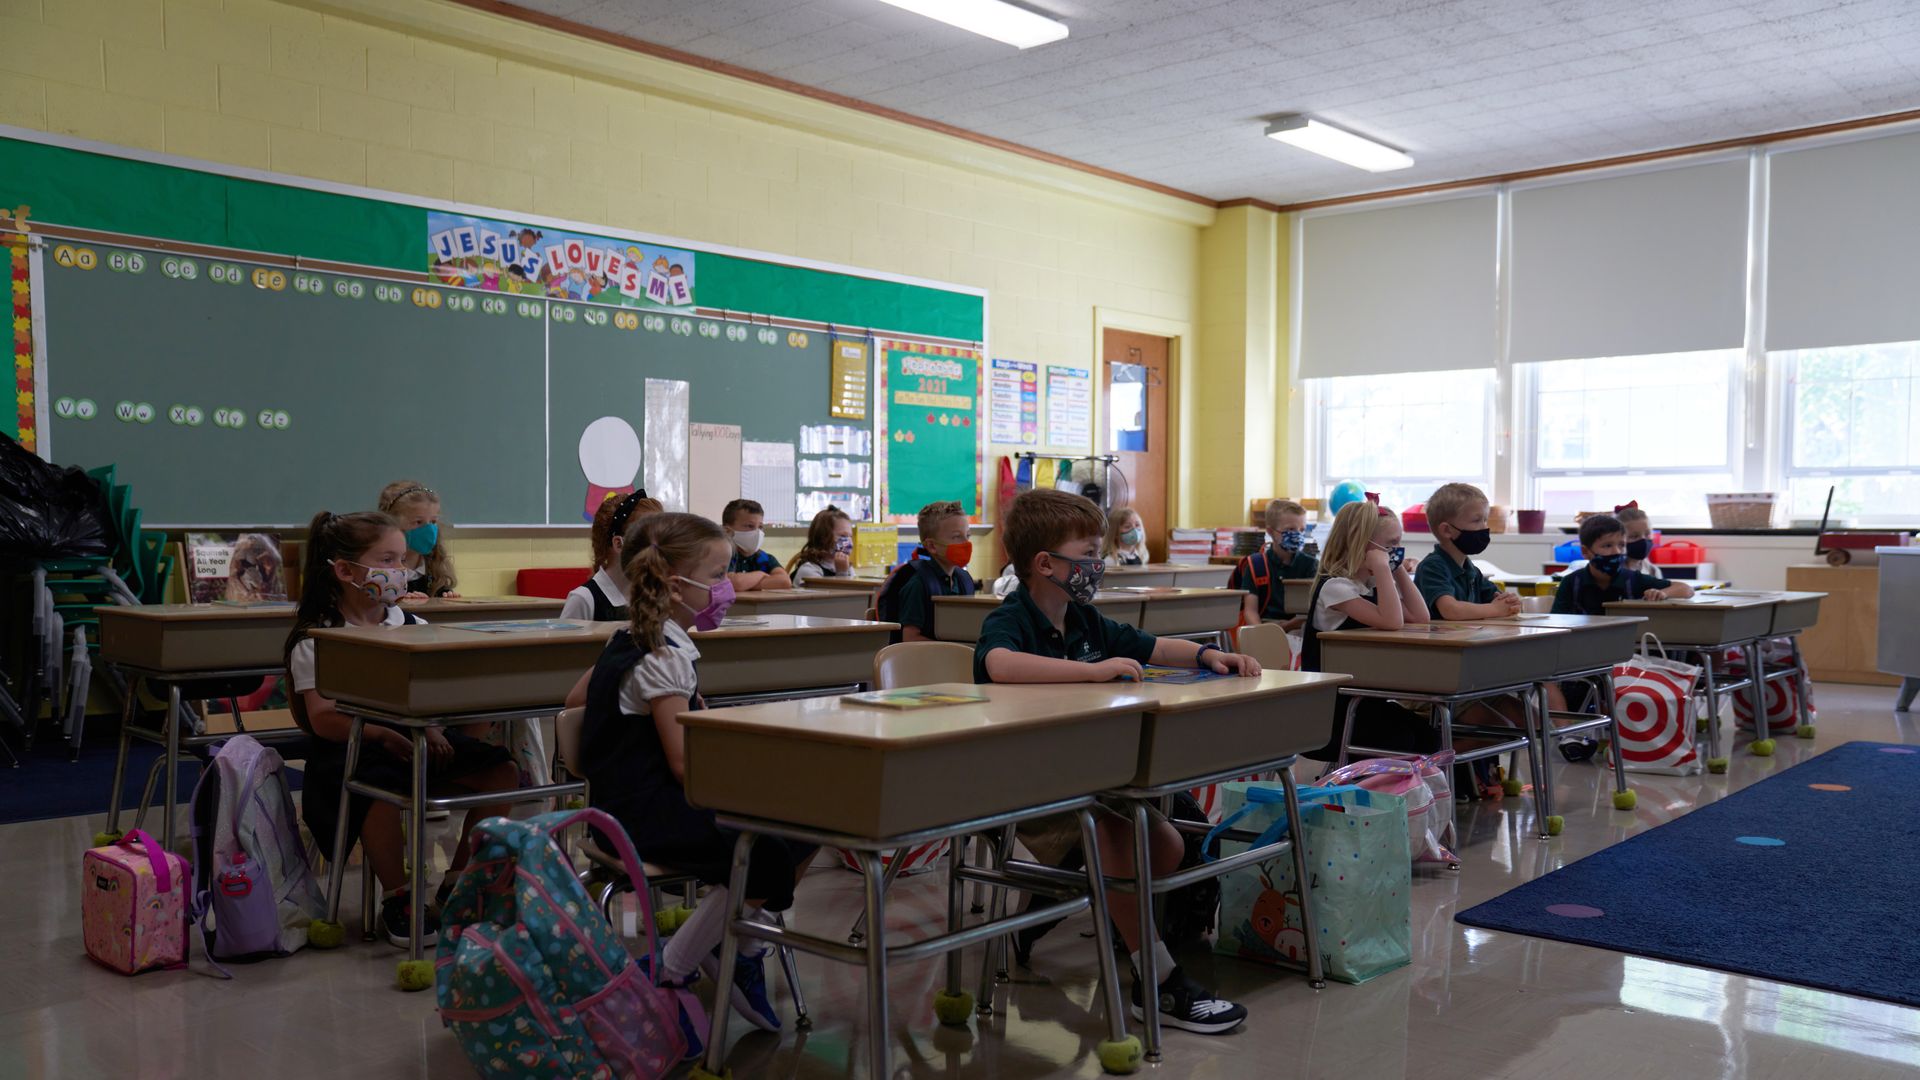 irst grade students at a Catholic elementary school on the first day of classes in Boston, Massachusetts, U.S., on Tuesday, Sept. 7, 2021.